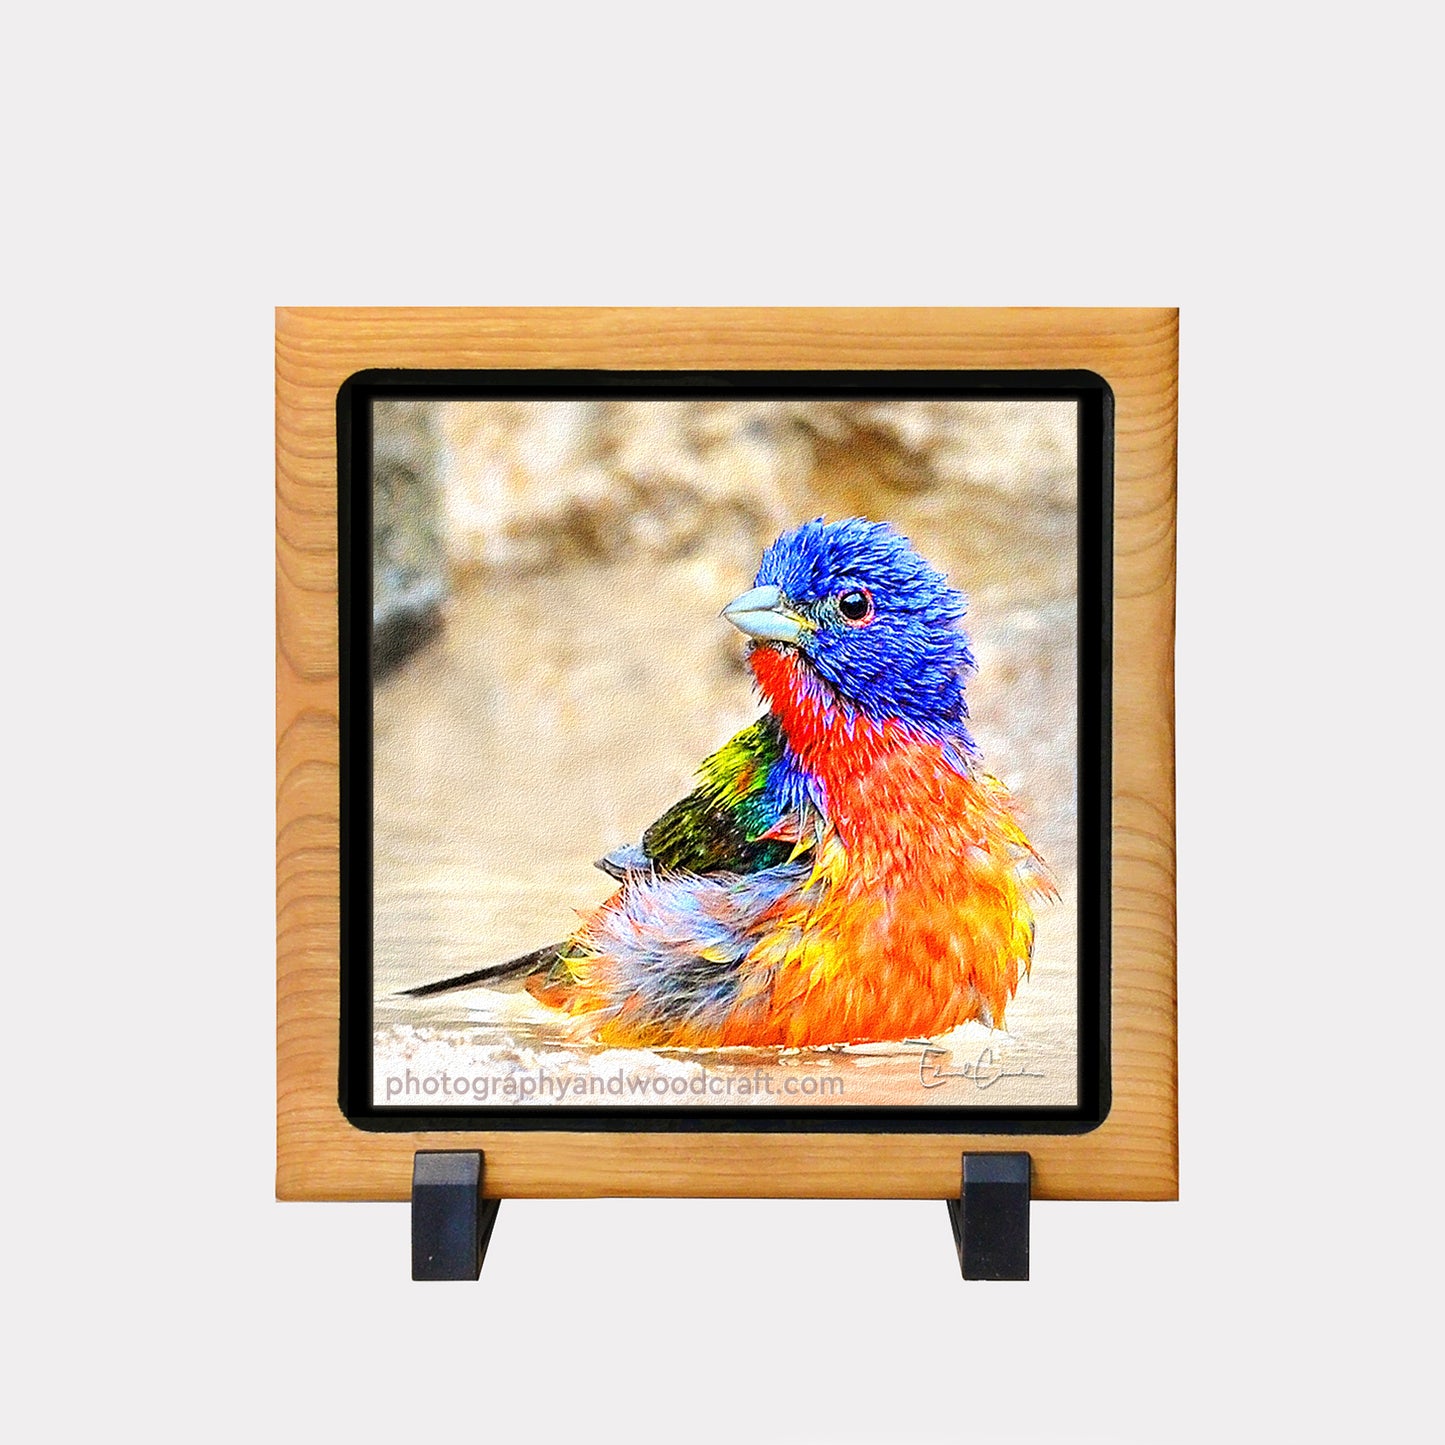 5" x 5" Painted Bunting. Canvas Print in Solid Wood Floating Frame